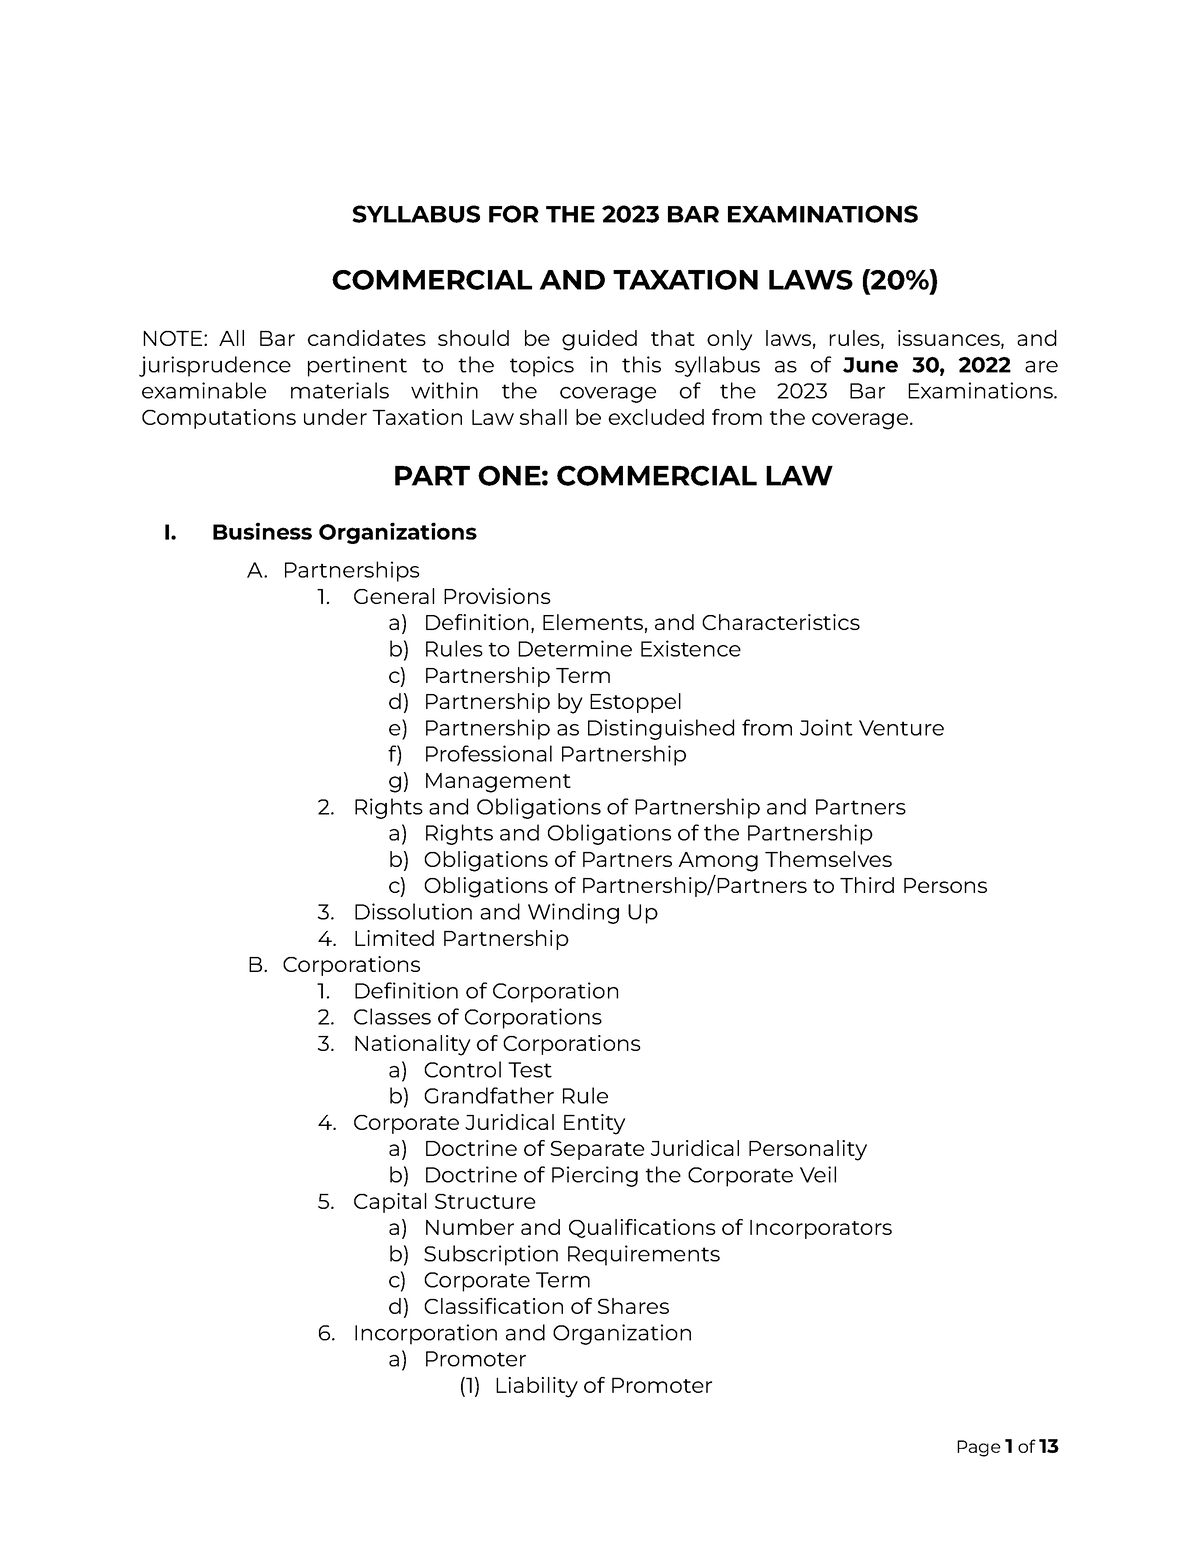 Commercial and Taxation Law 2023 Bar Syllabus SYLLABUS FOR THE 2023